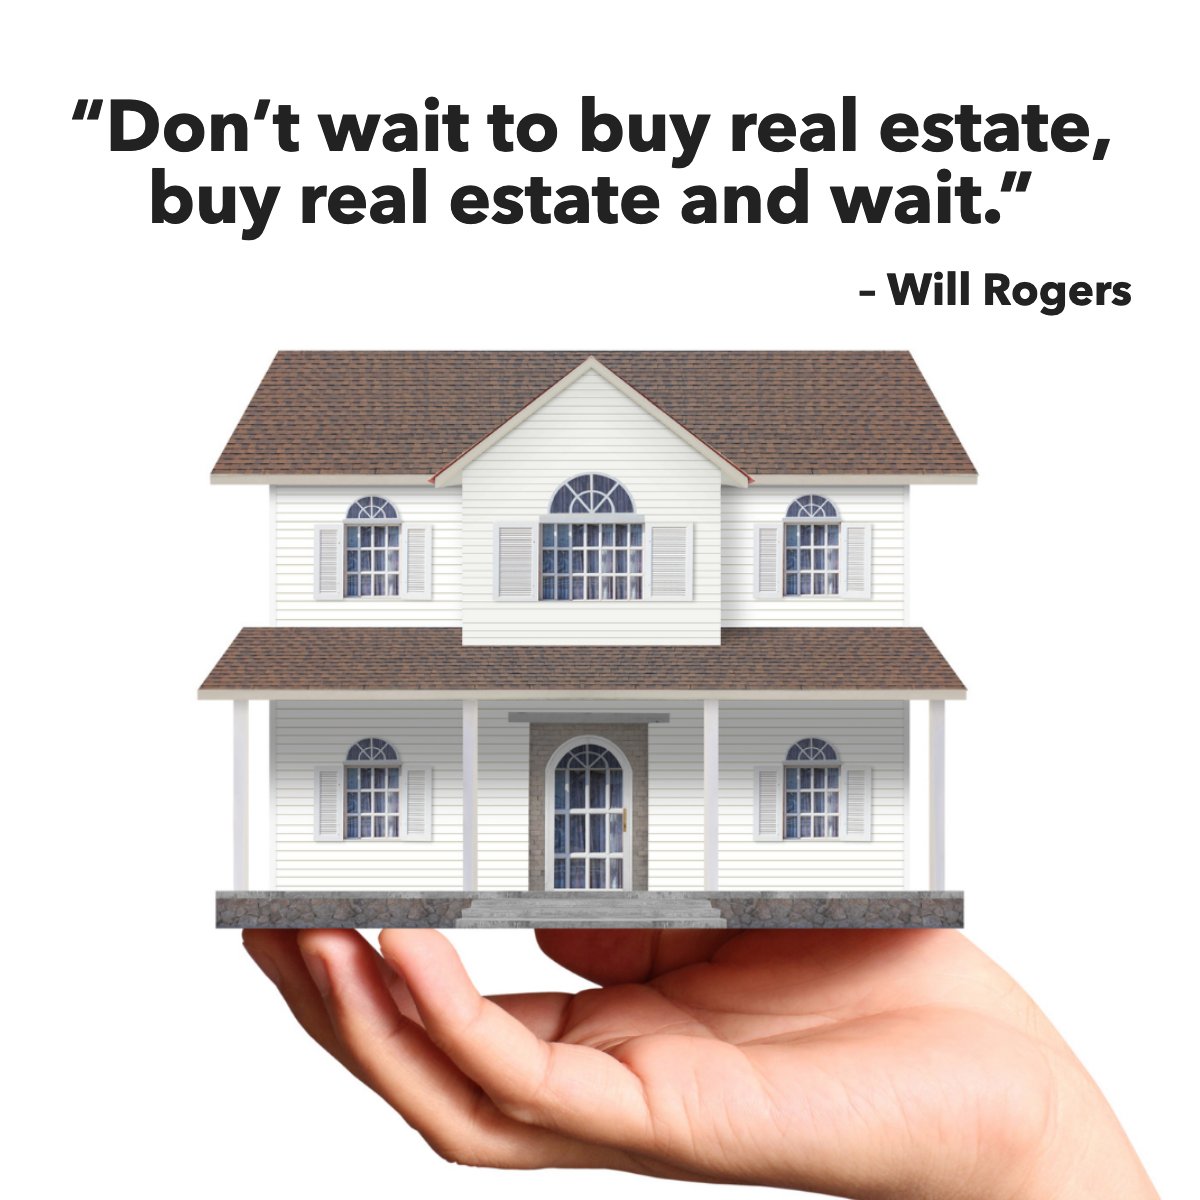 'Don't wait to buy real estate, buy real estate and wait.' 
― Will Rogers 📖

#realestate     #house     #buying     #investing     #invest     #propertyinvestment     #quote     #quoteoftheday     #WillRogers
#Buyingahome #Sellingahome #Wisconsinrealestate